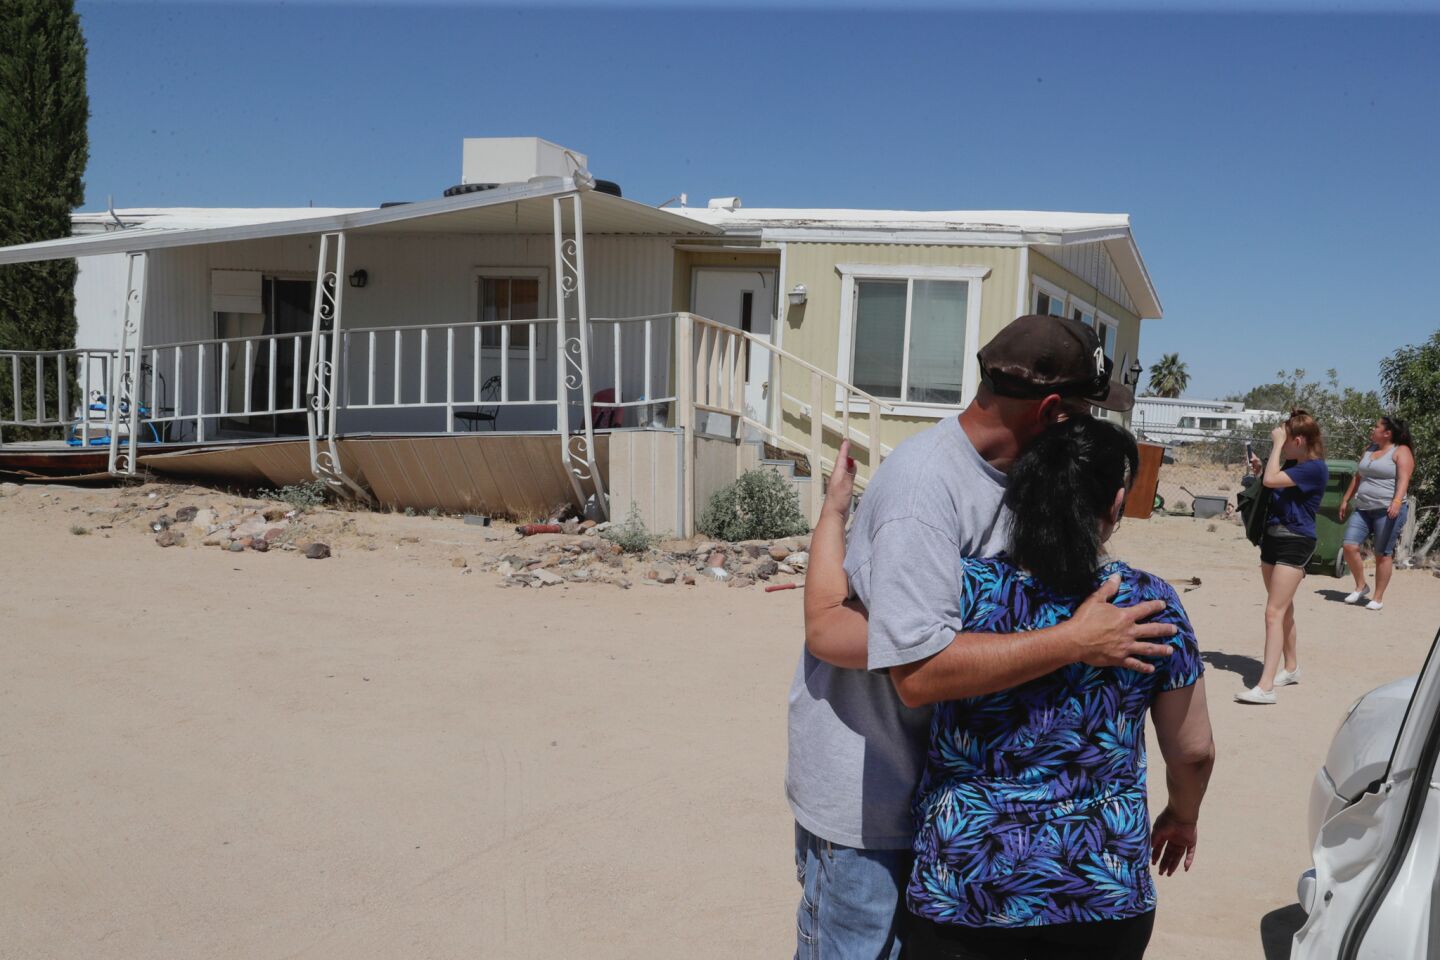 Charles Hawkins, left hugs his mother Elizabeth at his Ridgcrest area mobile home. His wife was injured in the earthquake and his mobile home was damaged.